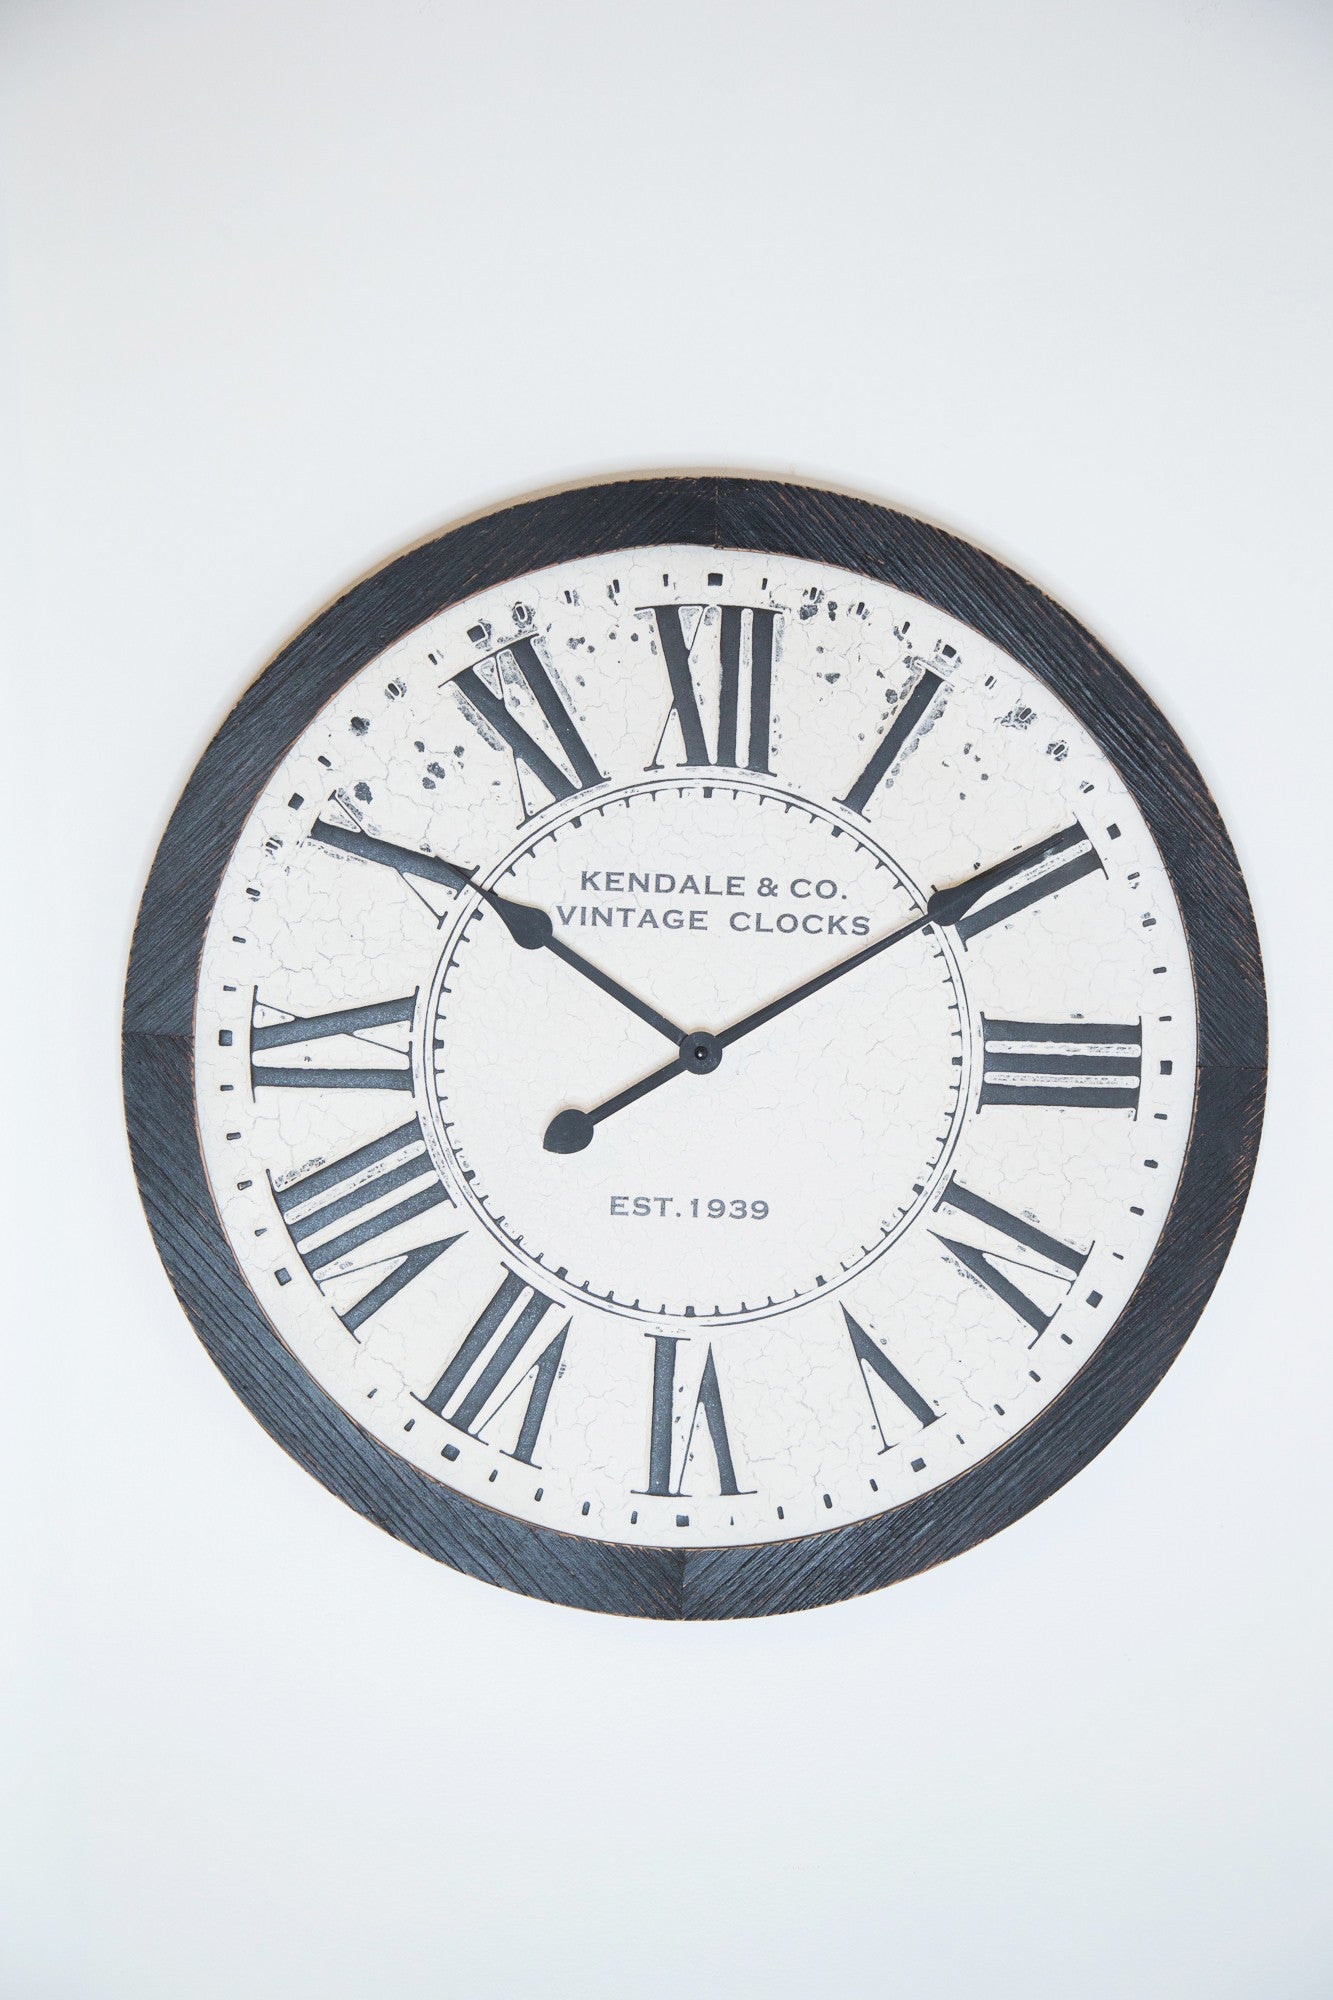 25" Circle Black and White Analog Vintage Style Crackle Wall Clock